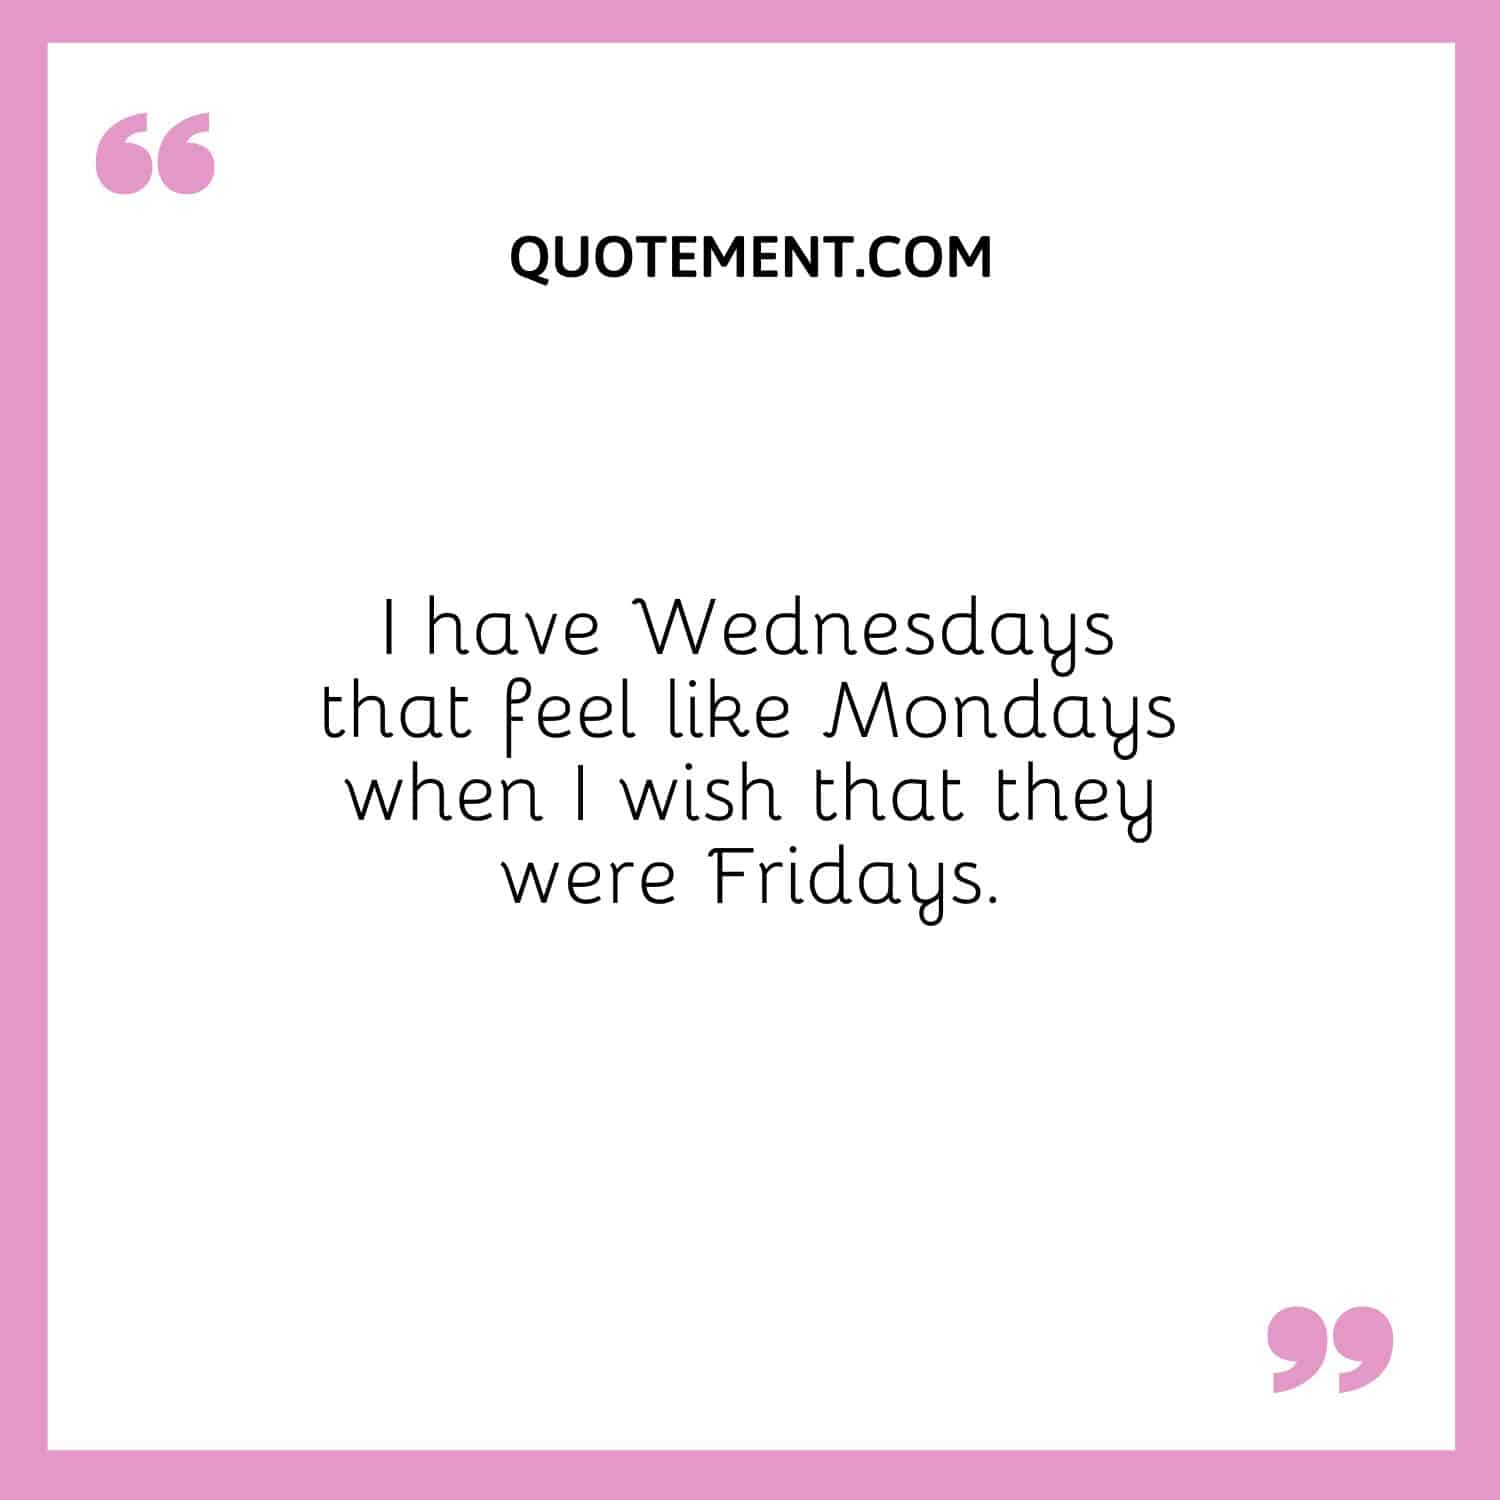 I have Wednesdays that feel like Mondays when I wish that they were Fridays.